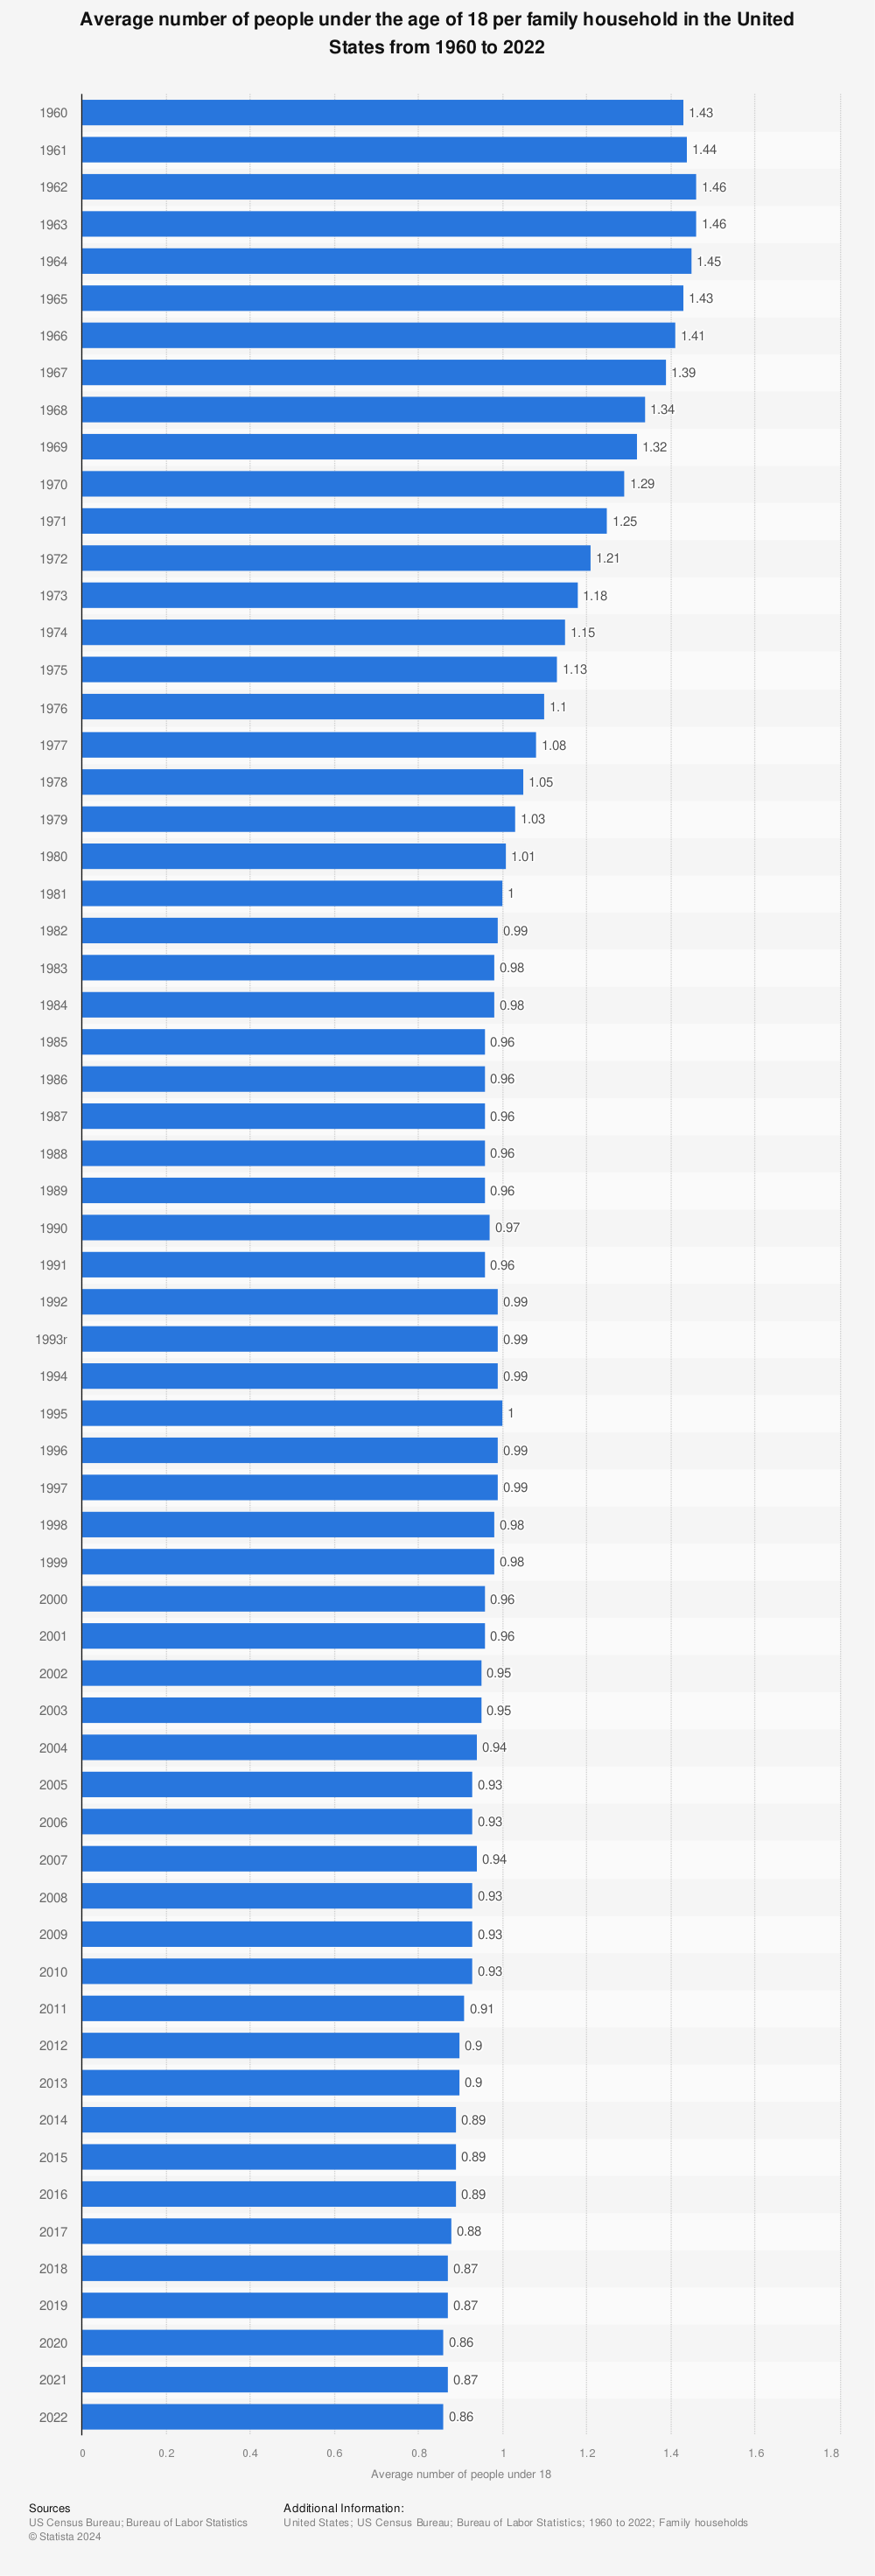 Statistic: Average number of people under the age of 18 per family household in the United States from 1960 to 2022 | Statista